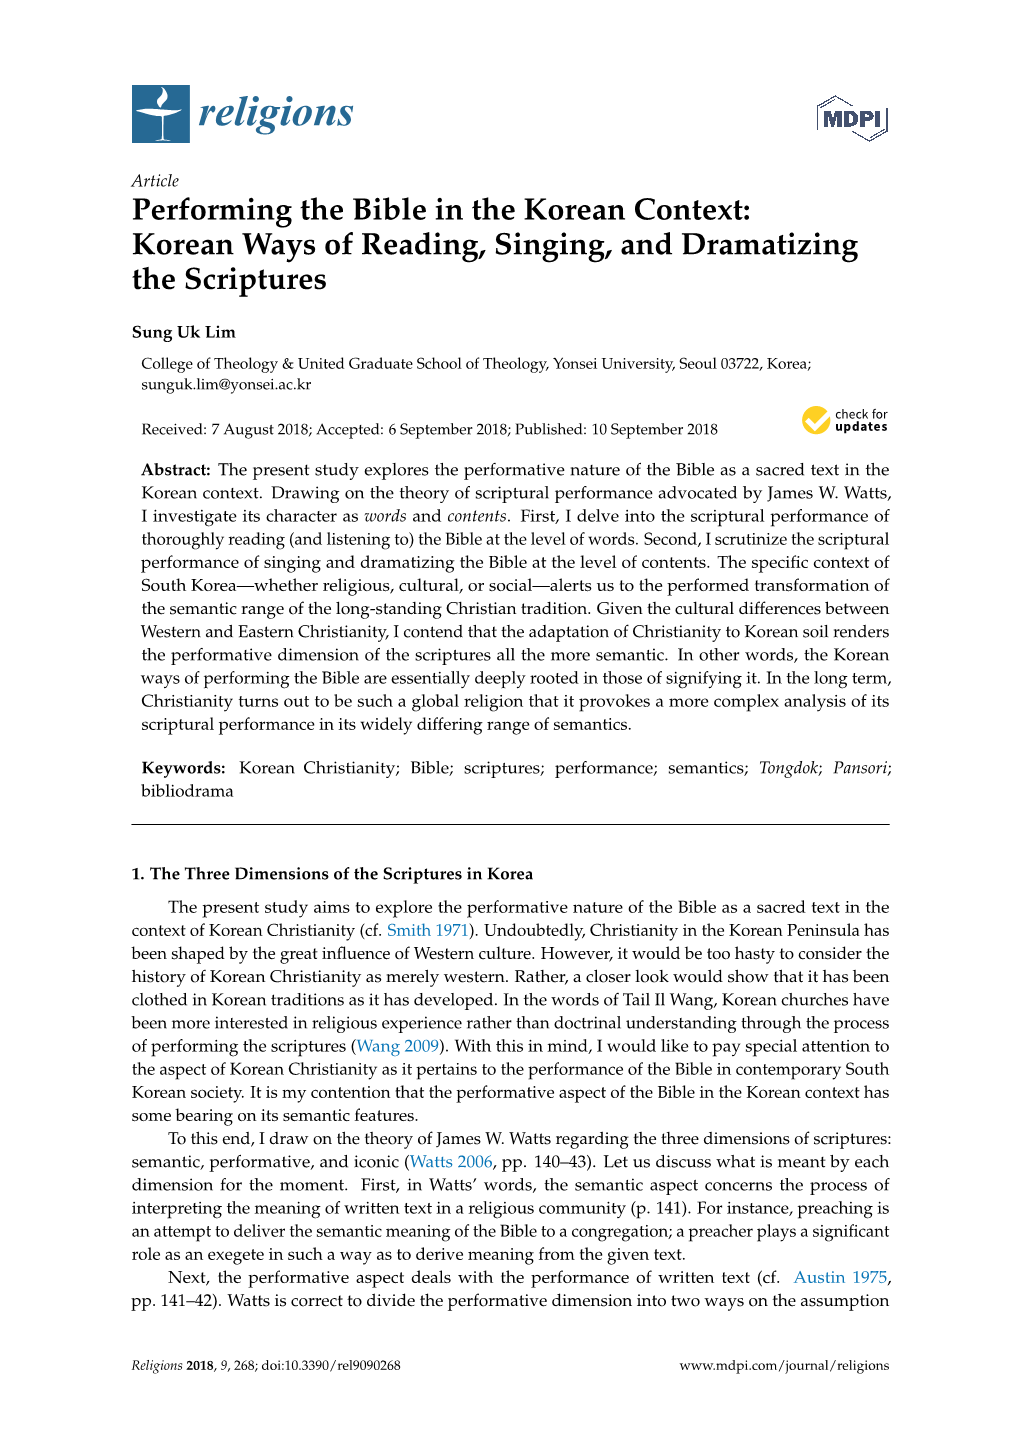 Performing the Bible in the Korean Context: Korean Ways of Reading, Singing, and Dramatizing the Scriptures